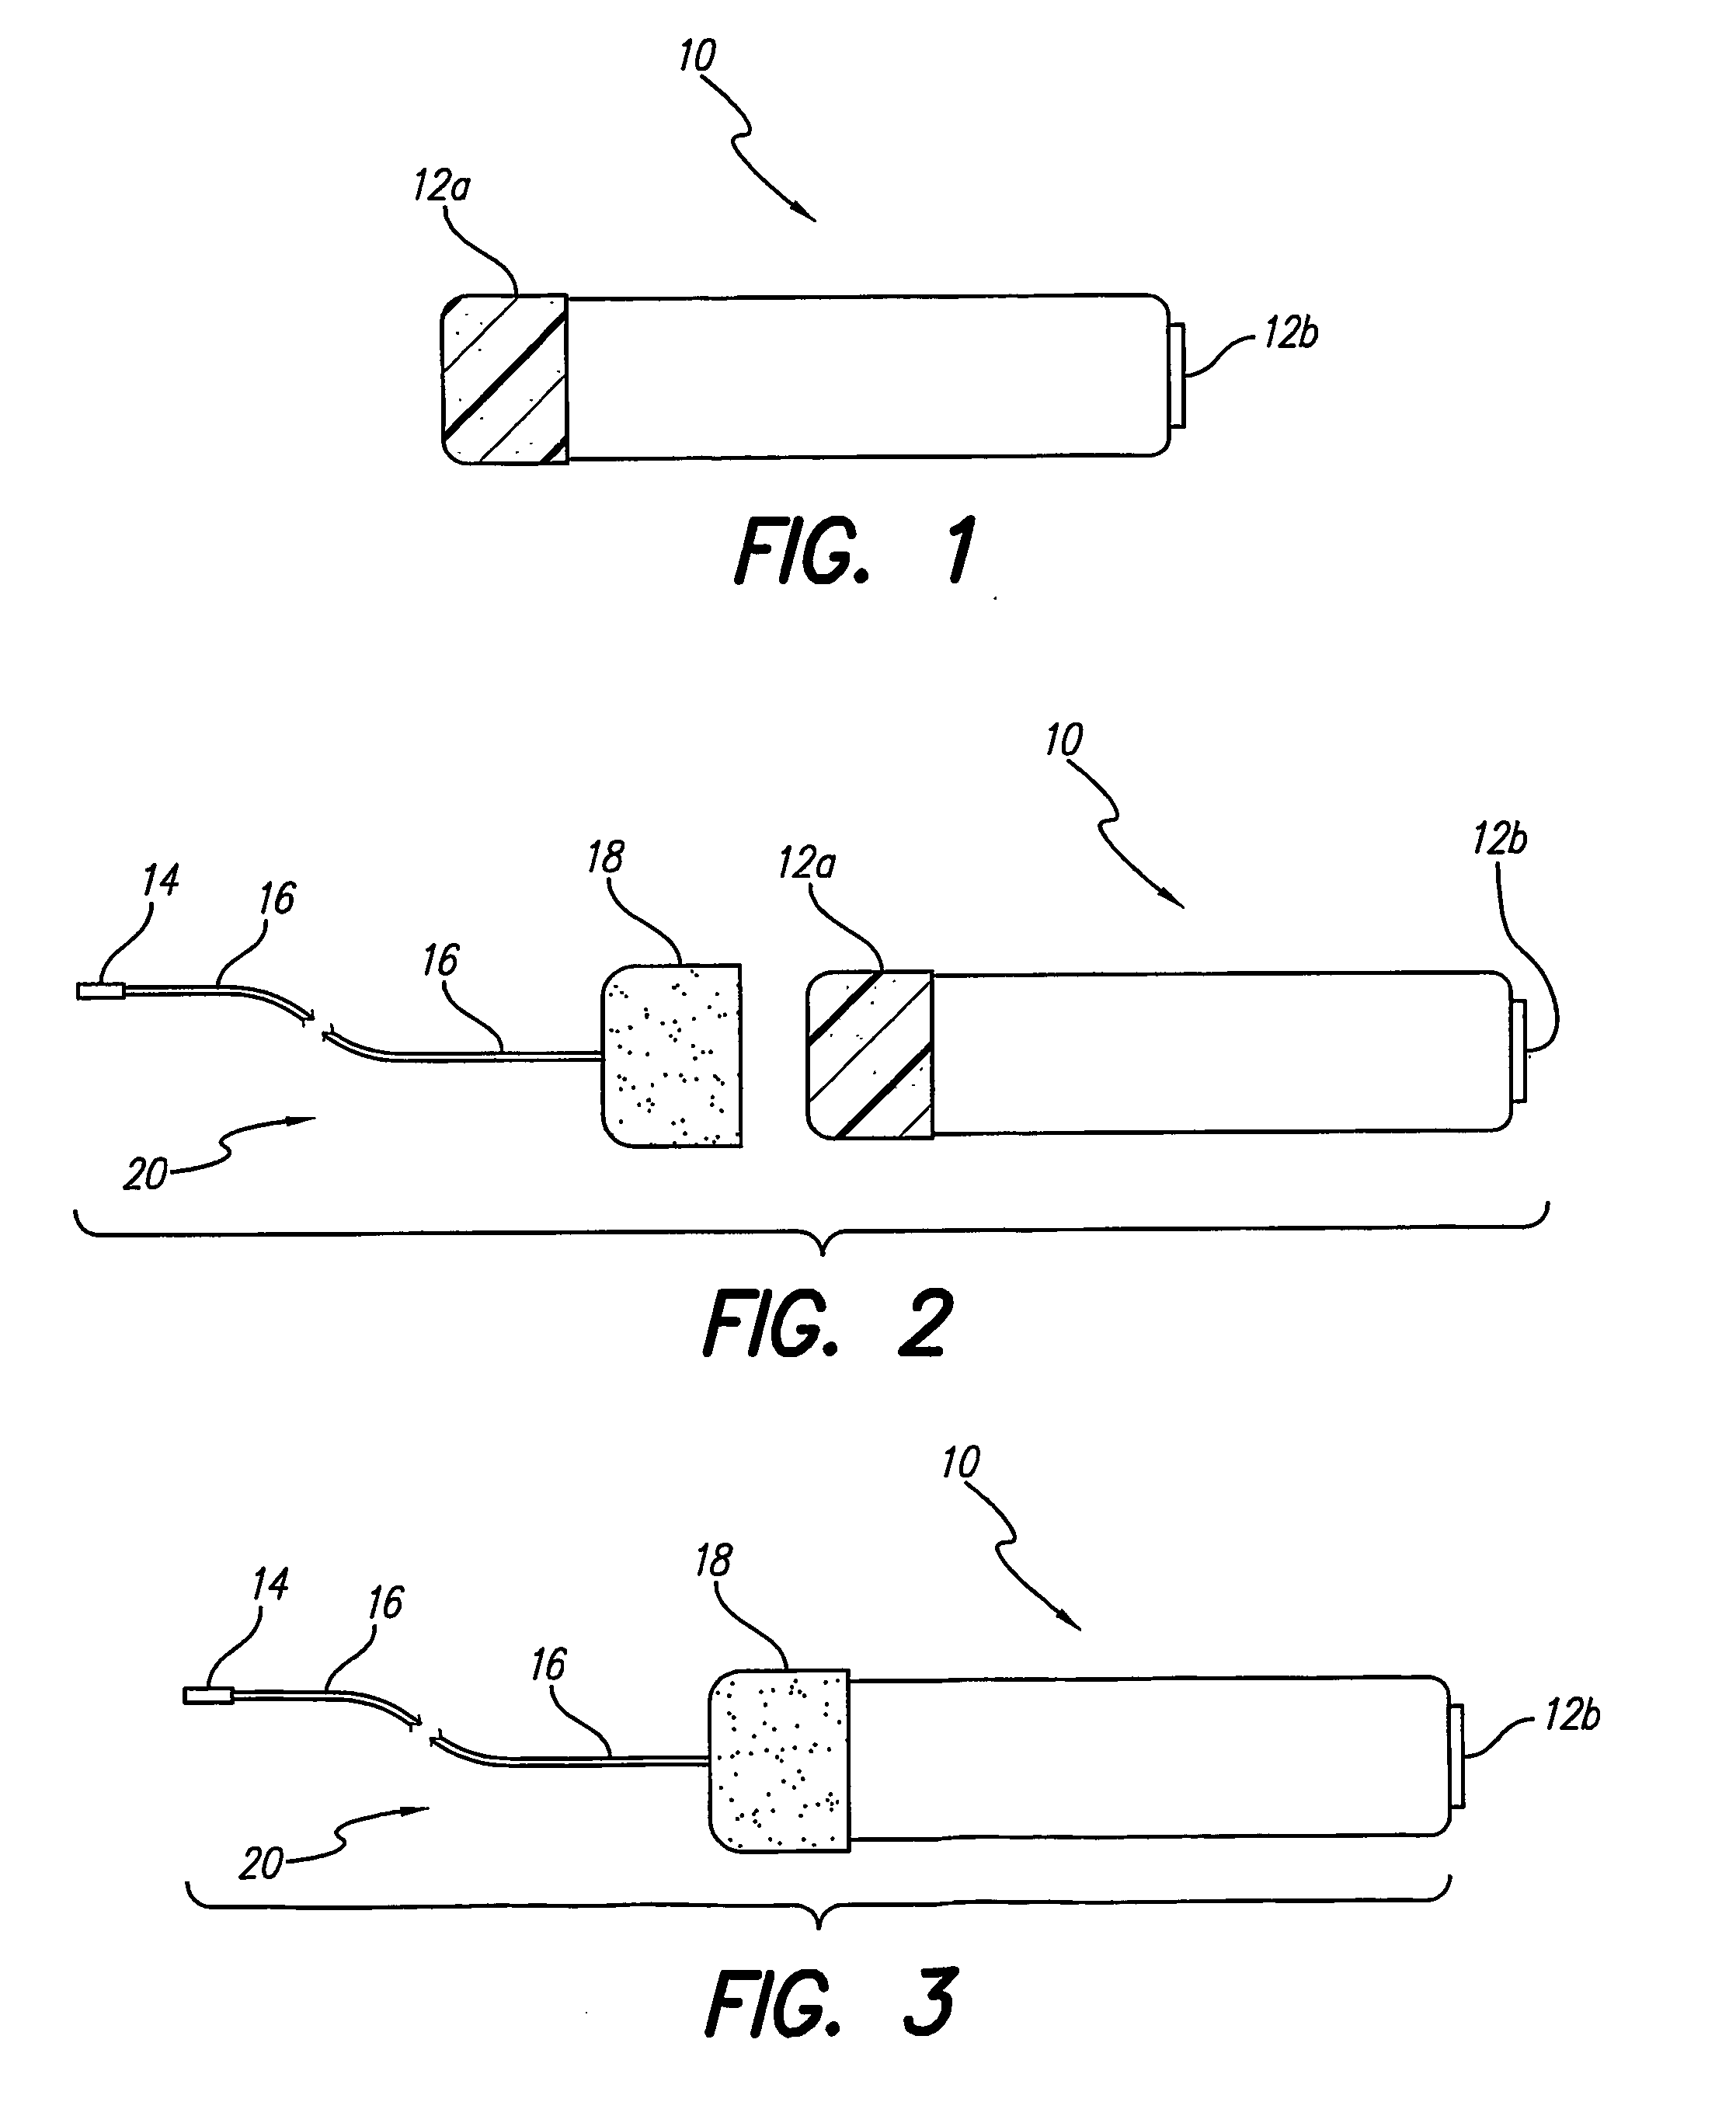 Lead assembly for implantable microstimulator